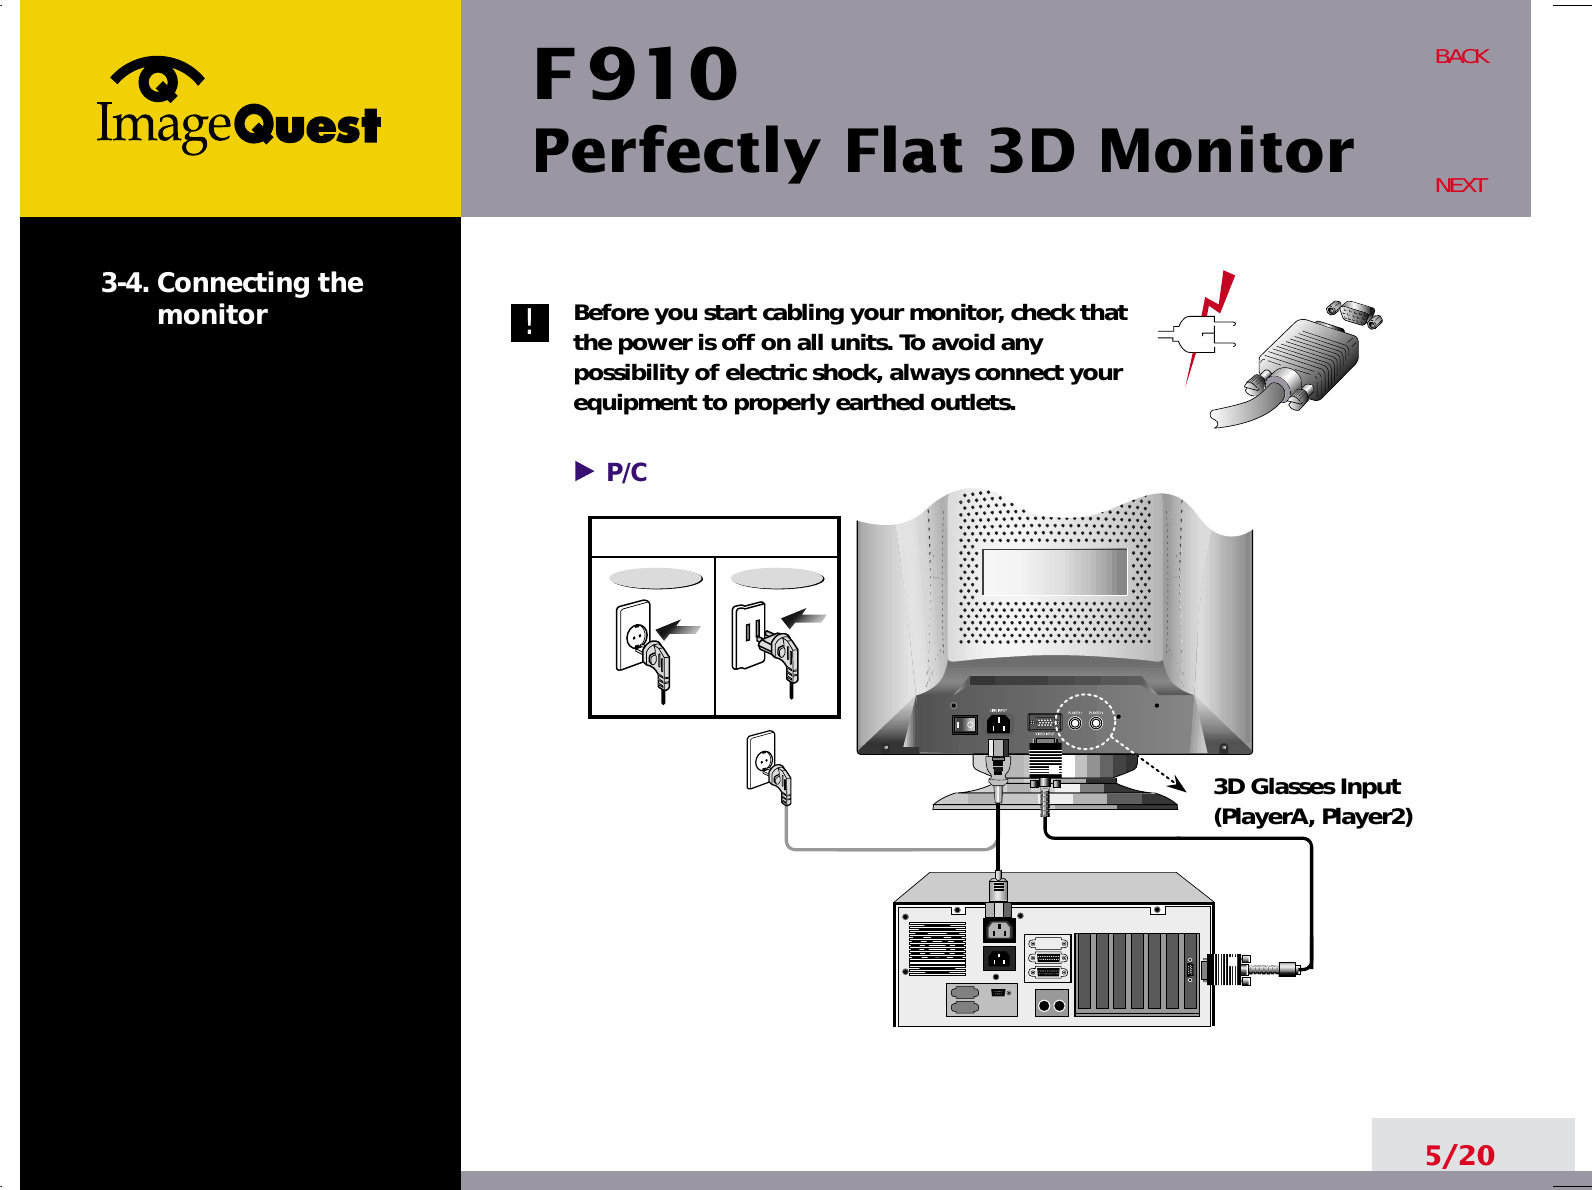 F 910Perfectly Flat 3D Monitor5/20BACKNEXT3-4. Connecting themonitor Before you start cabling your monitor, check thatthe power is off on all units. To avoid anypossibility of electric shock, always connect yourequipment to properly earthed outlets.!P/C3D Glasses Input(PlayerA, Player2)